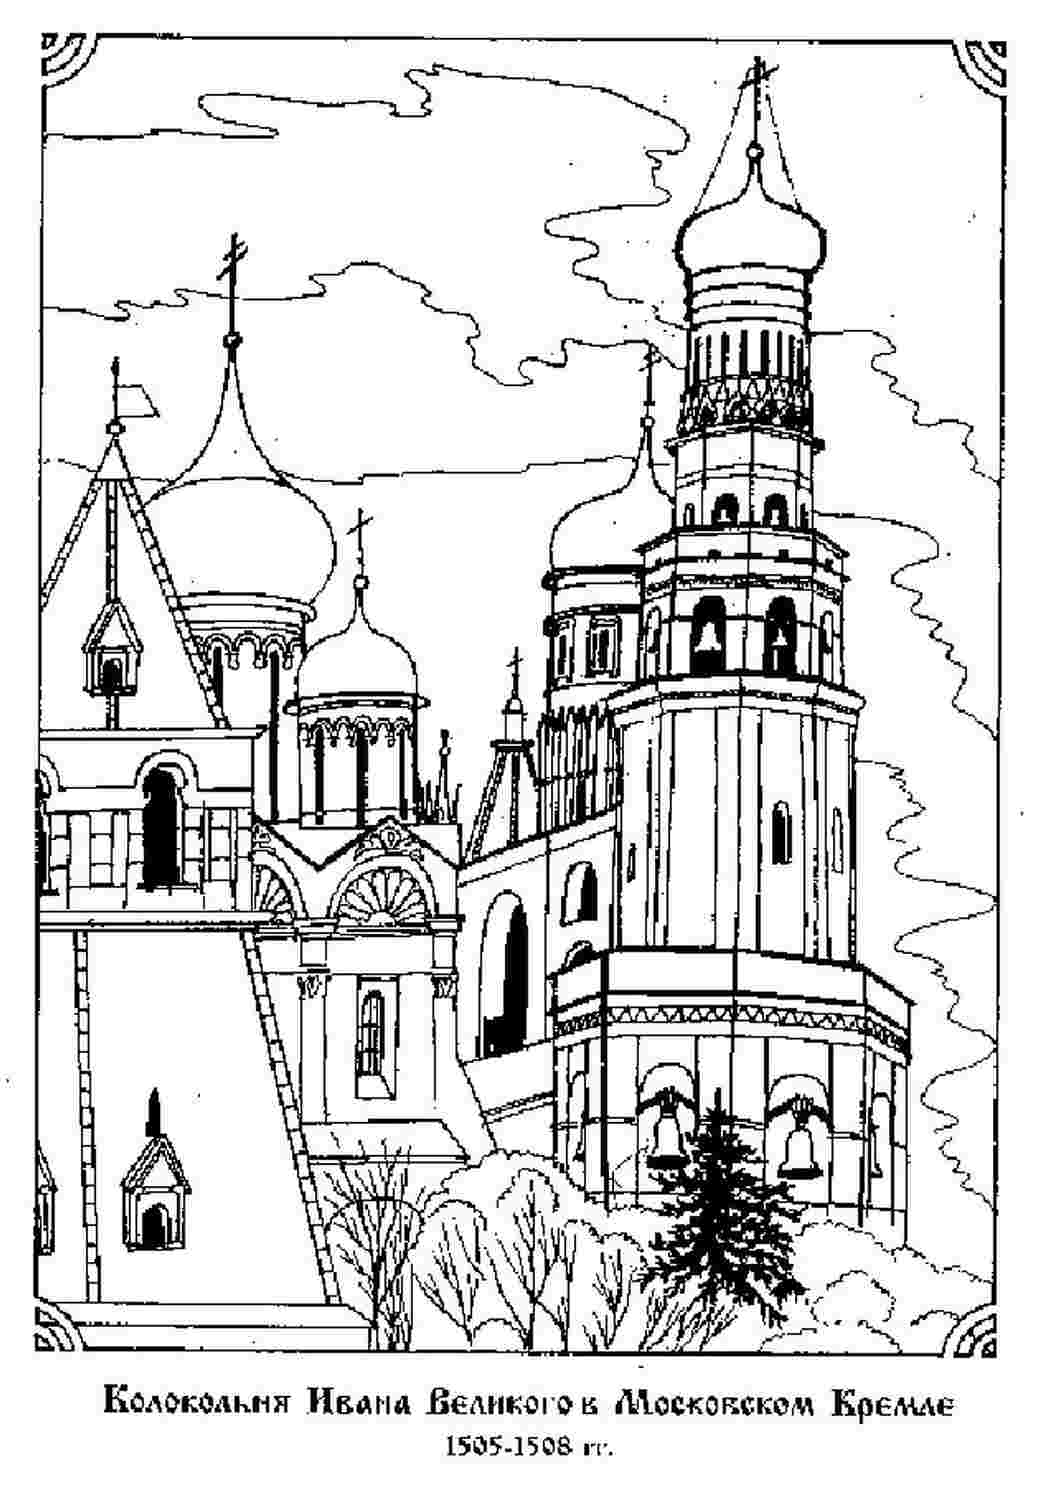 Monuments and other sights in Europe coloring pages printable games #2